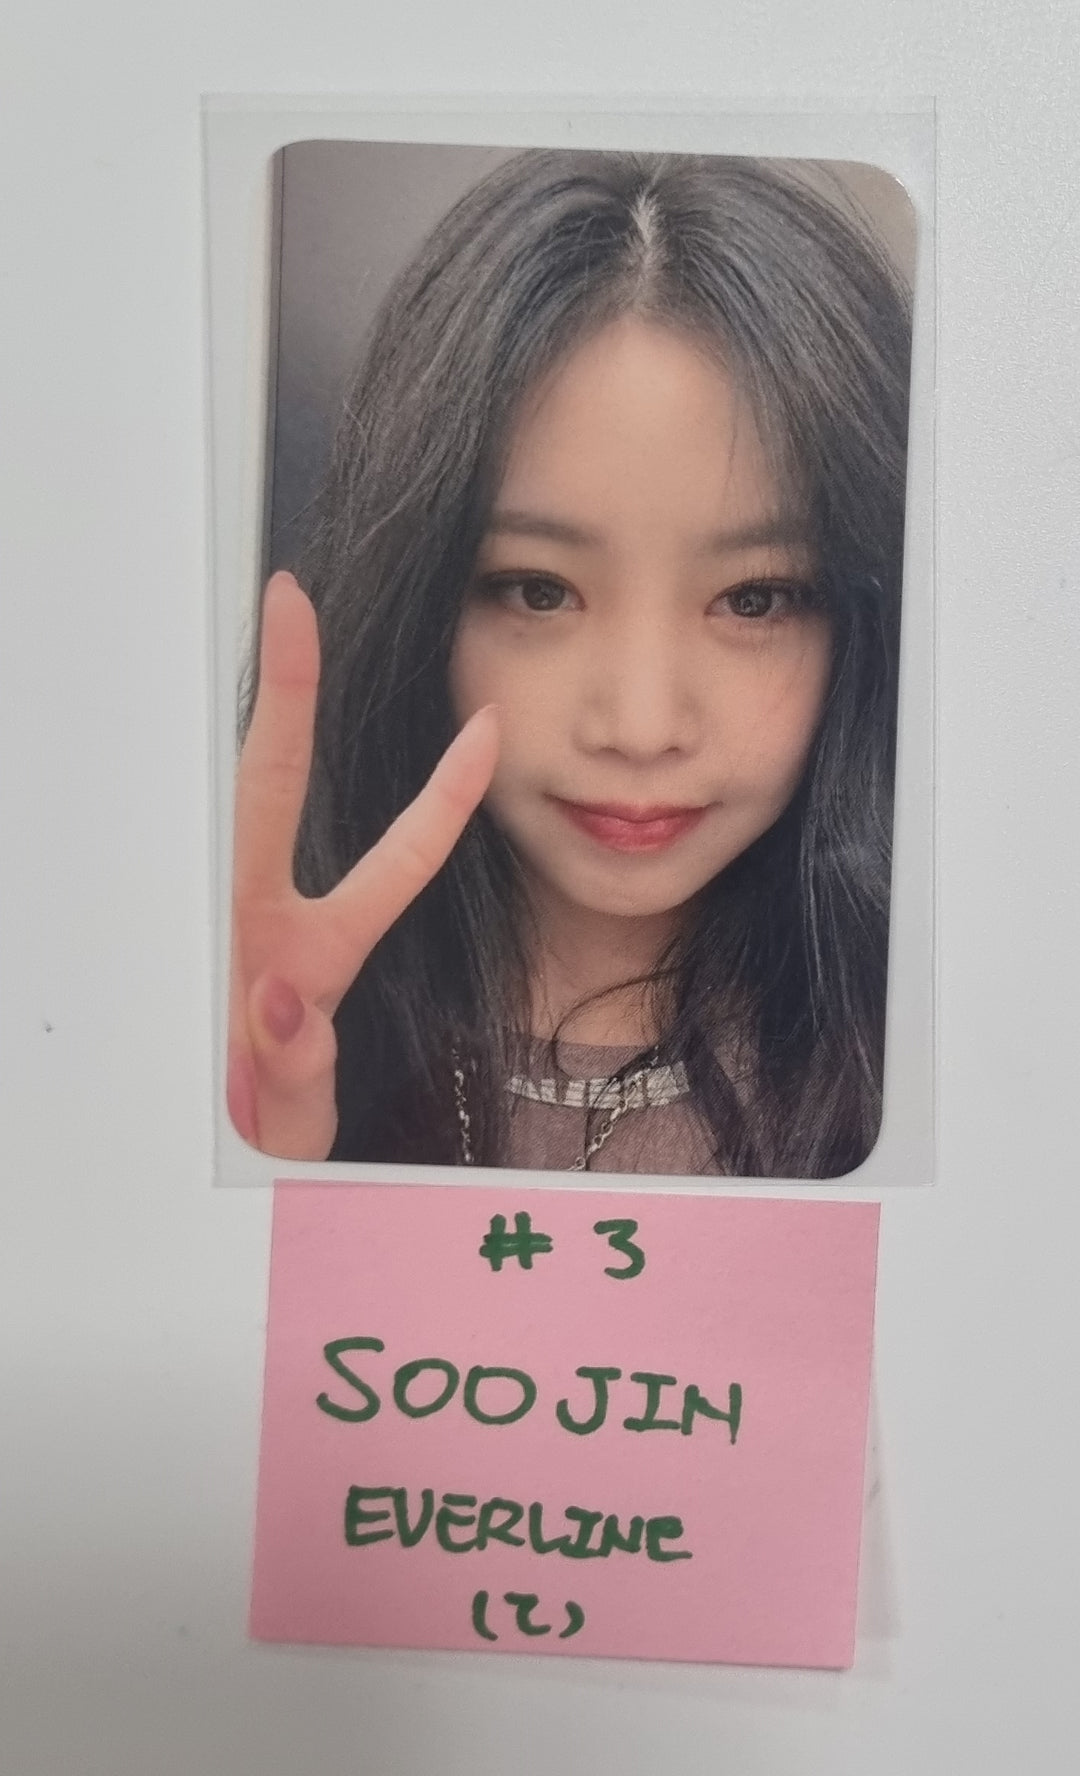 Soojin "아가씨" 1st EP - Everline Pop-UP Store MD Event Photocard [23.11.24]